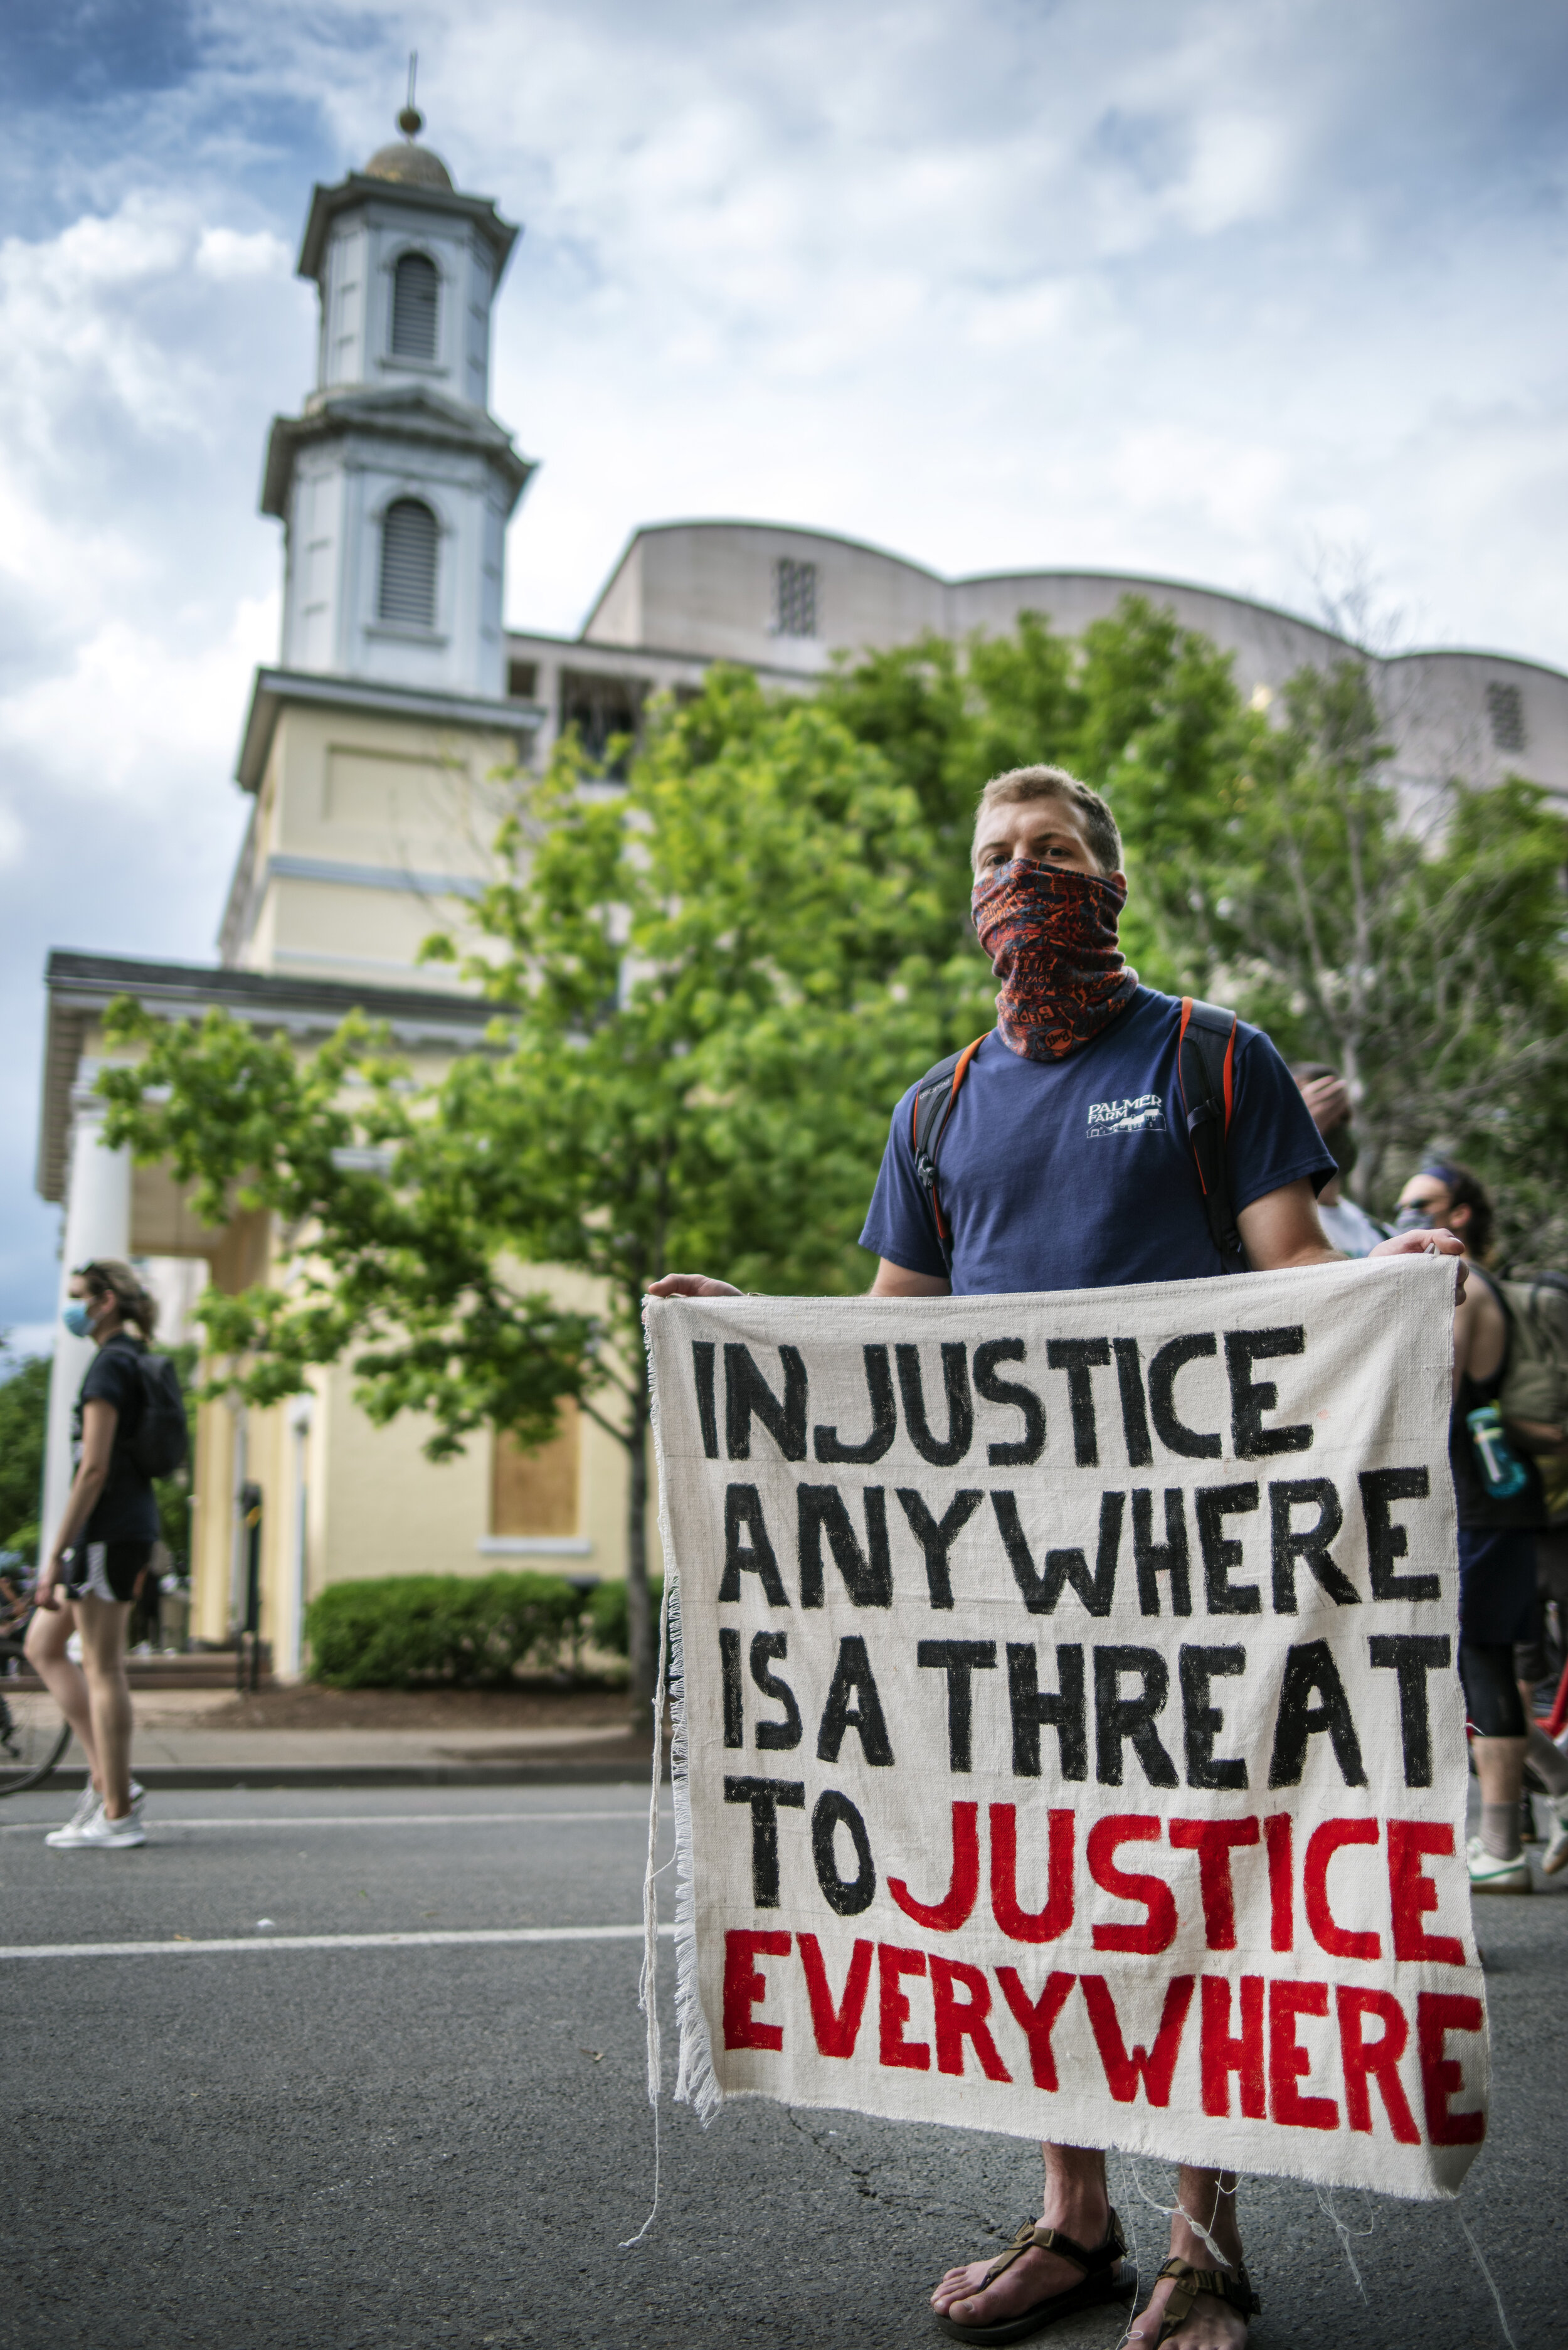 Protesters Rally in front of the White House in June 2020